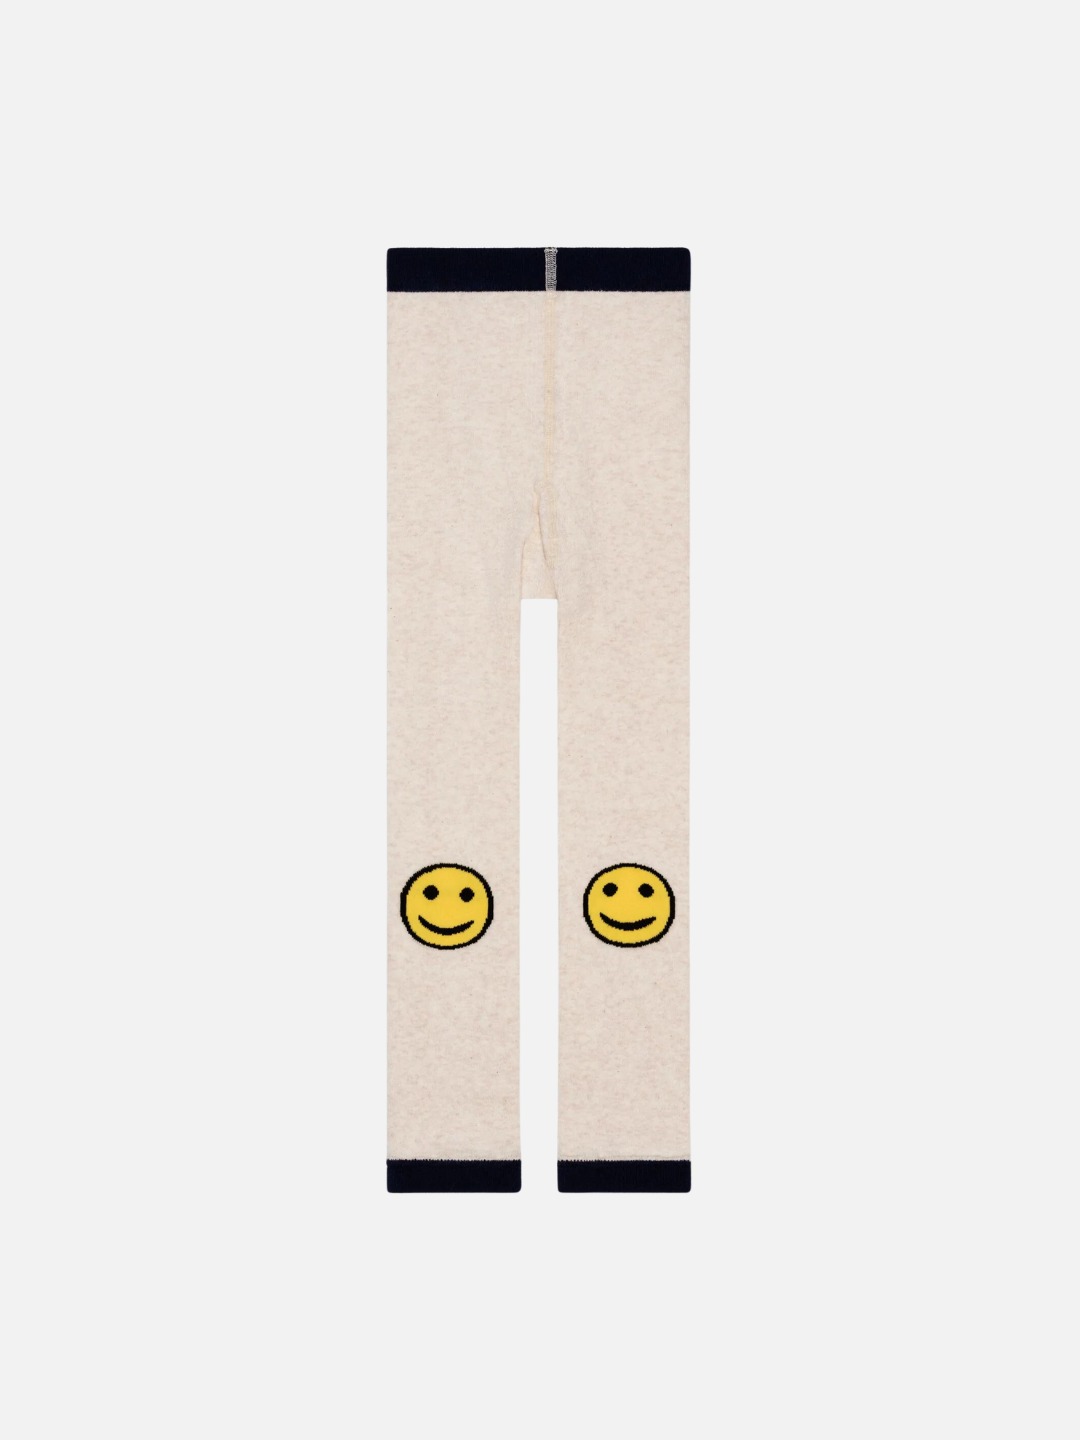 A pair of kids' leggings in cream, with yellow smileys on the knees and black waistband and hems